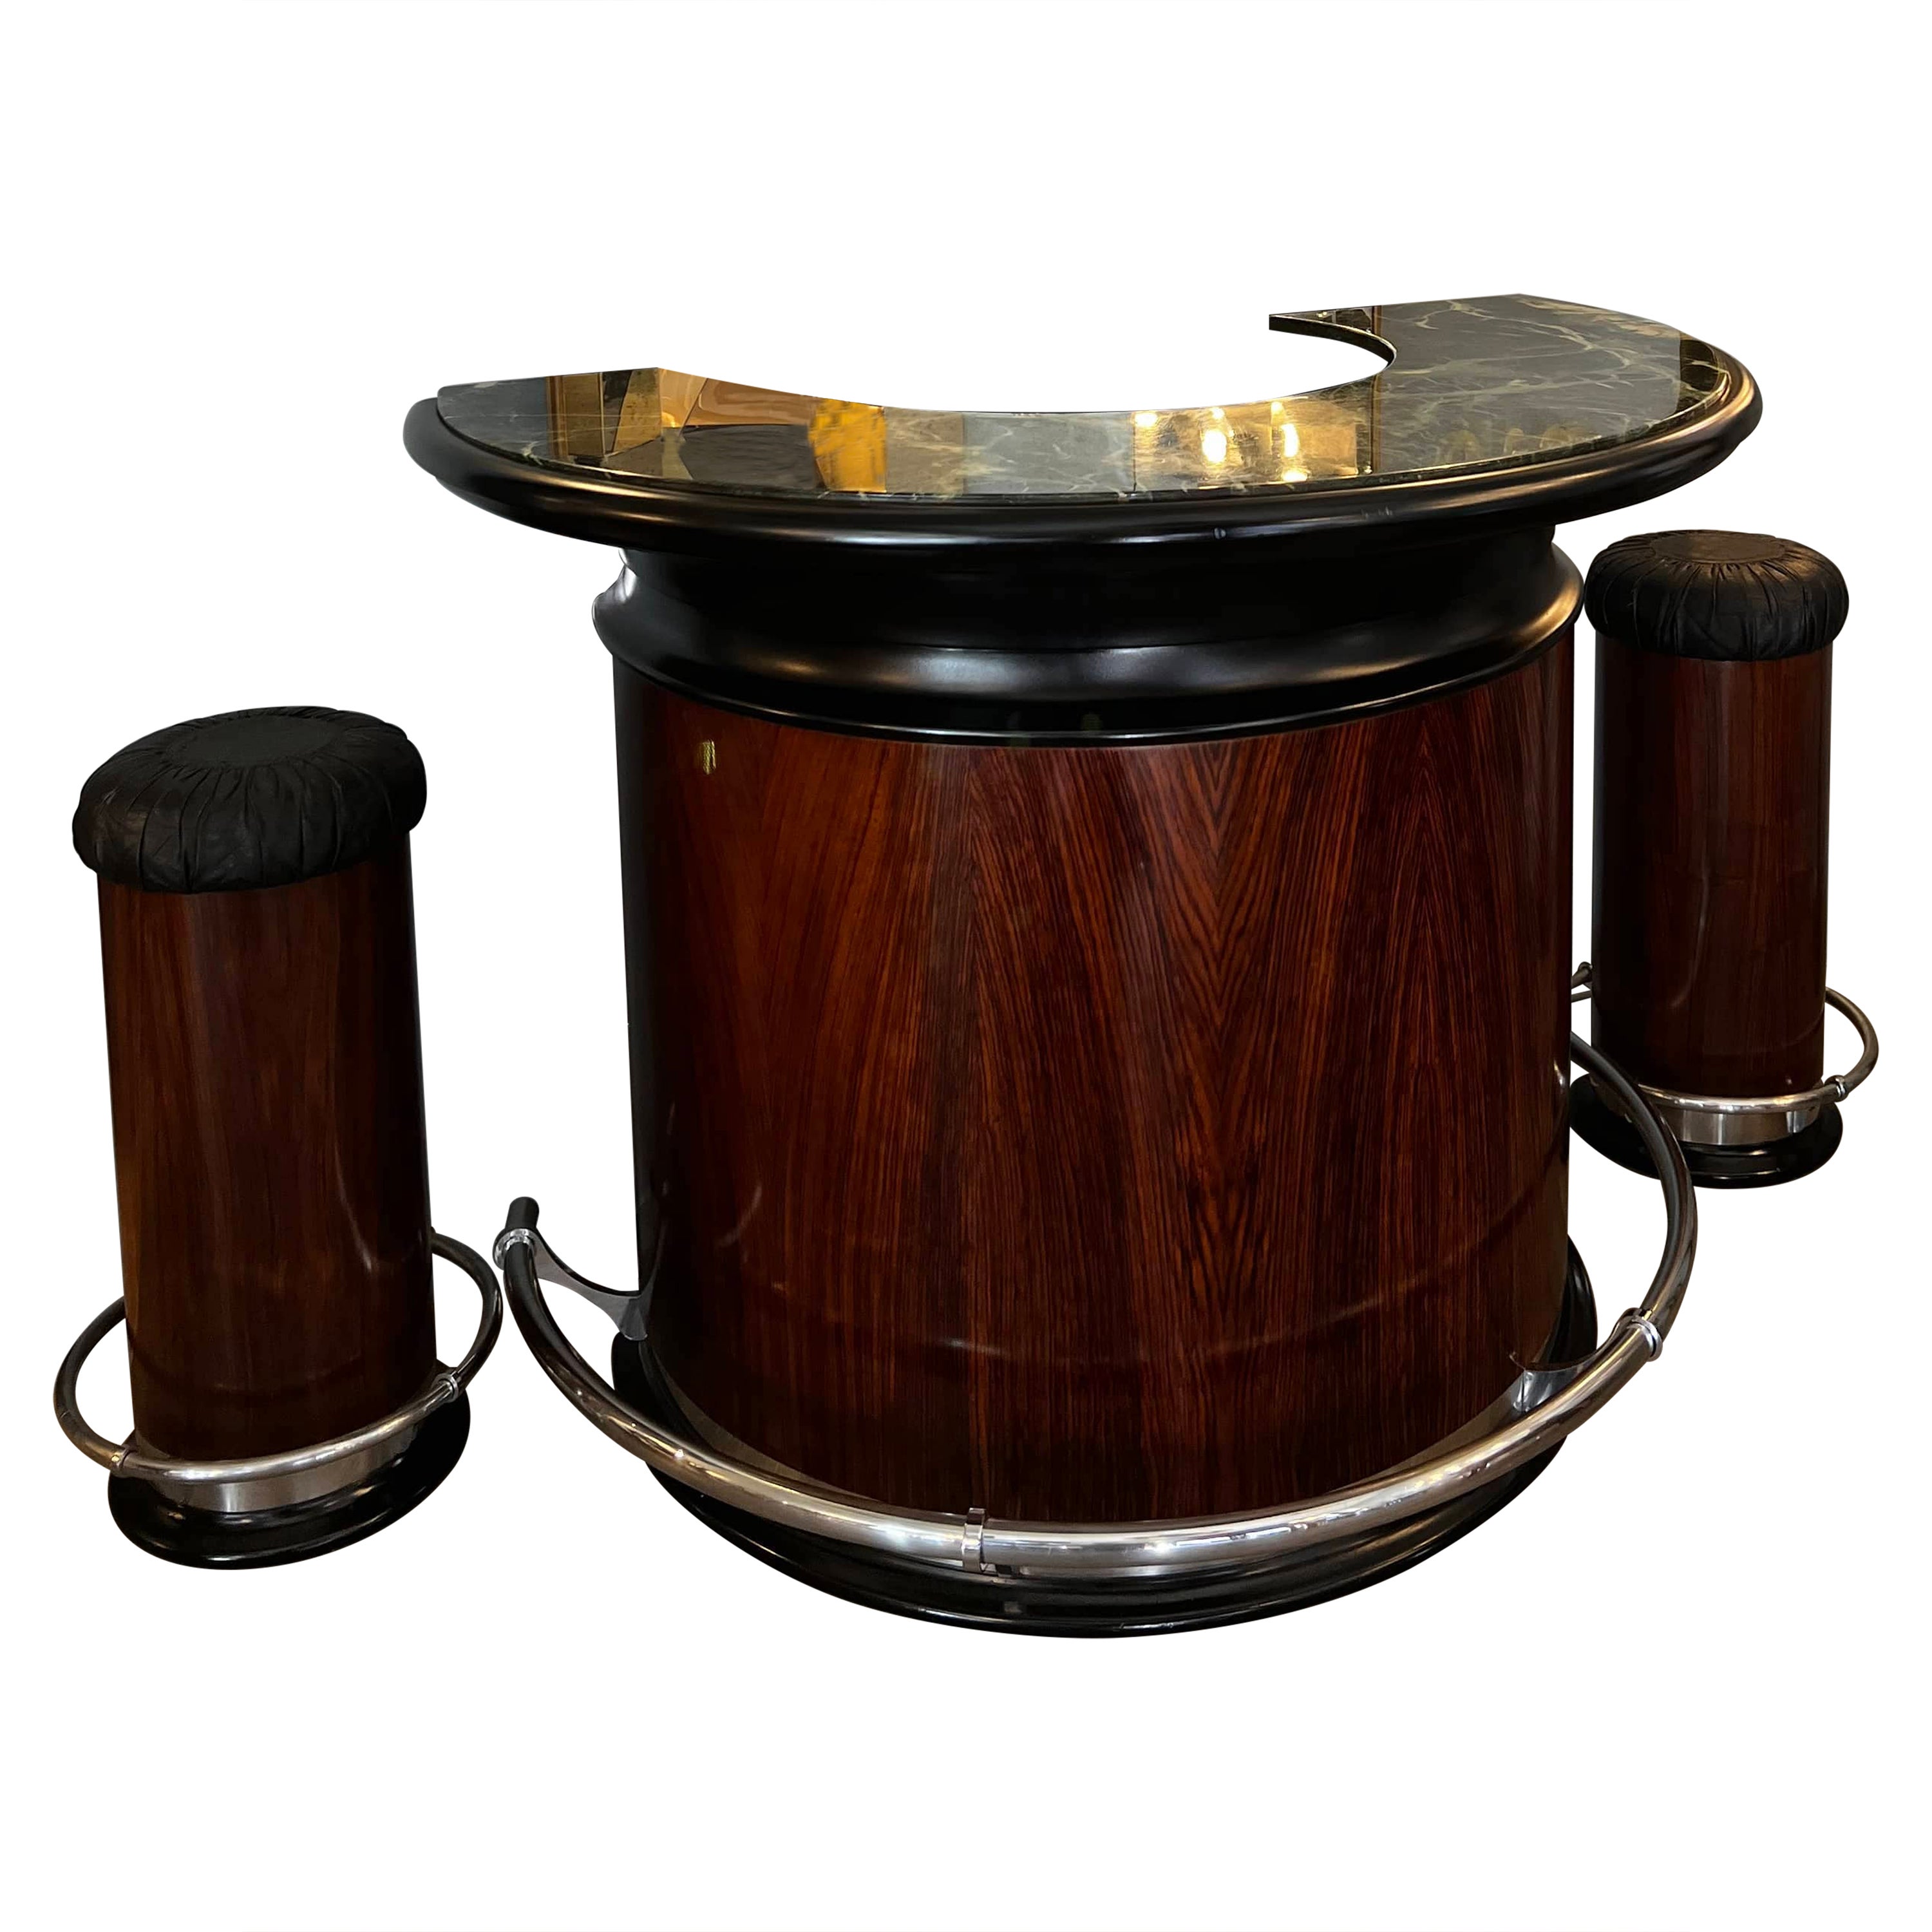 Semi-circular bar cabinet with two stools. In Art Deco style, this semi-circular-shaped counter features Verde Alpi marble top  and rosewood walls with black piping. Inside, the cabinet is organized with shelves. The two stools have faux leather